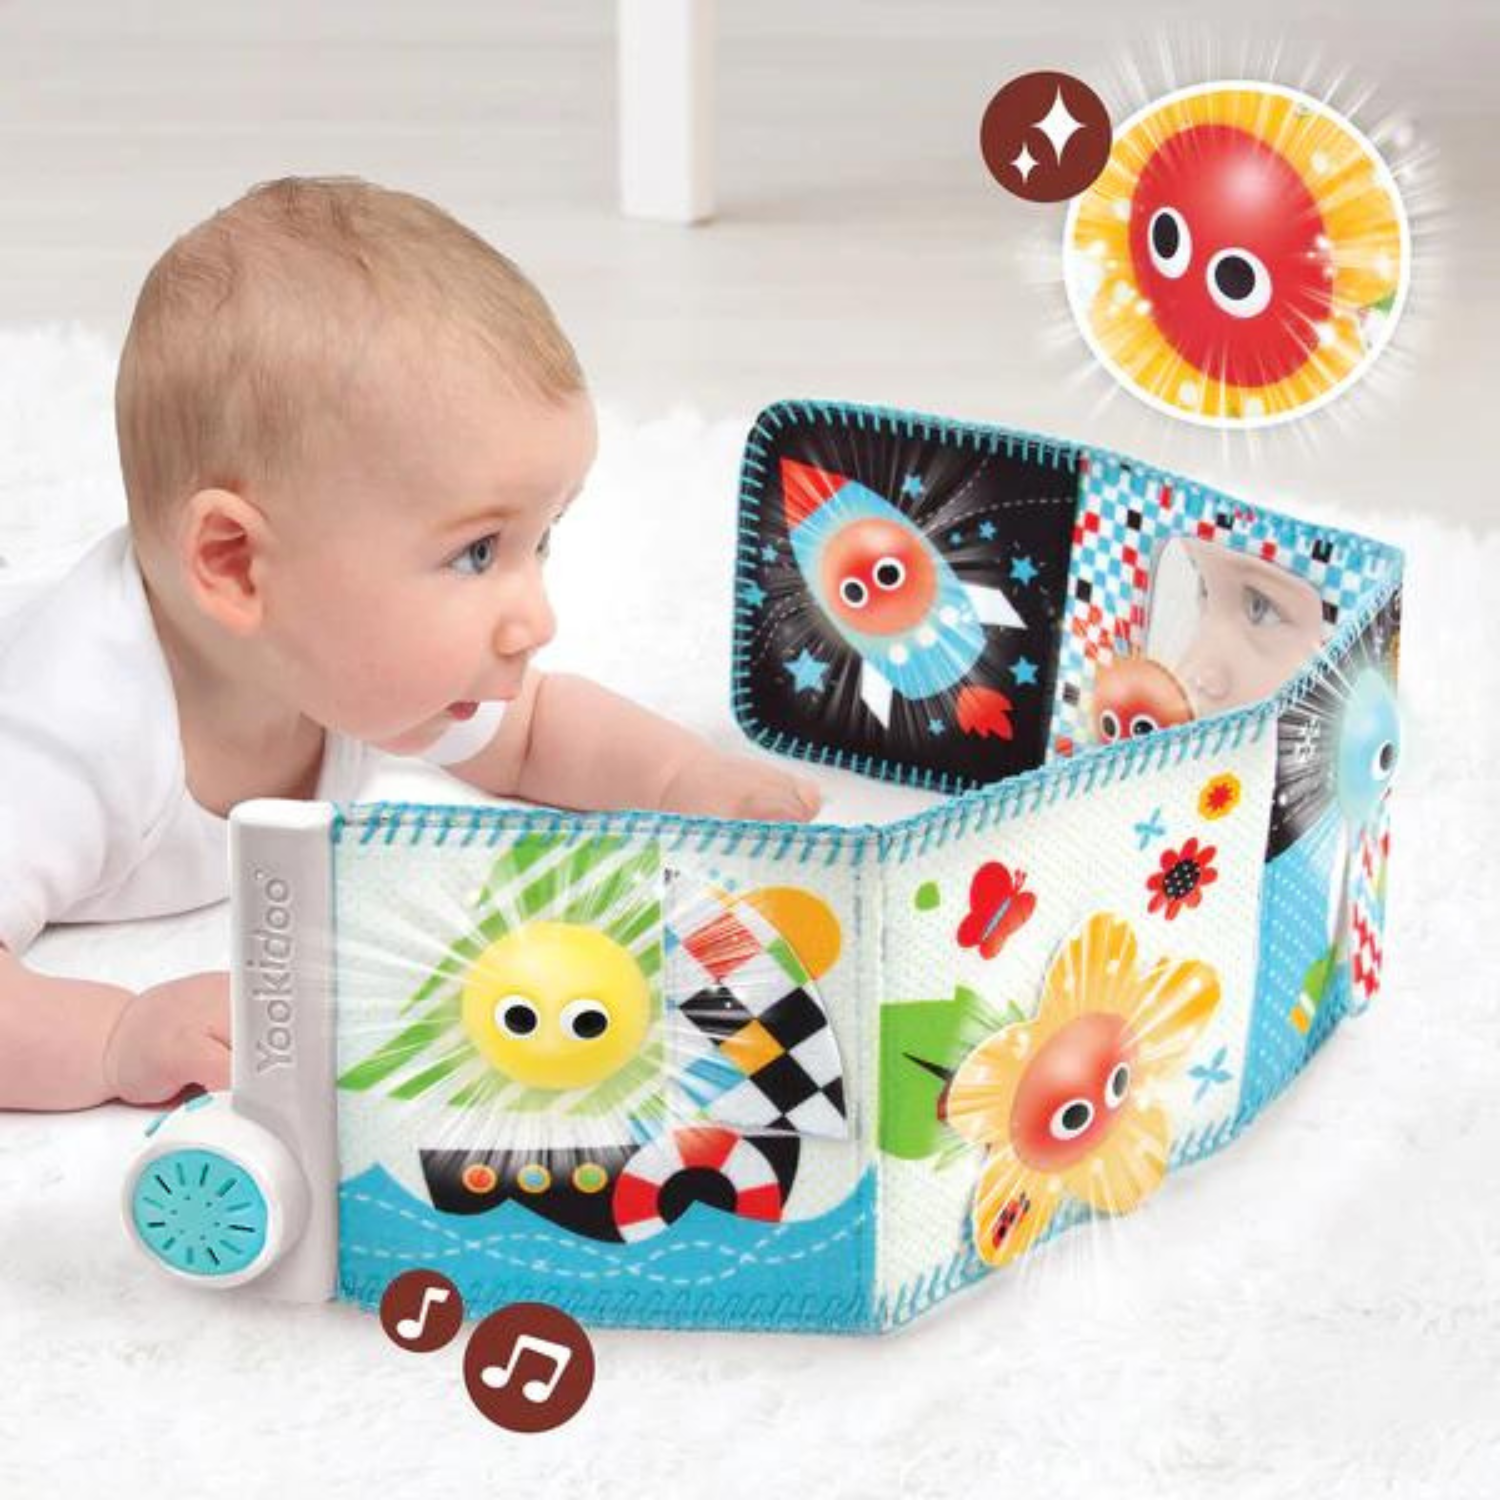 Yookidoo - Lights 'N' Music Baby Book - Baby Activity Toy - Age: +0M - +12M